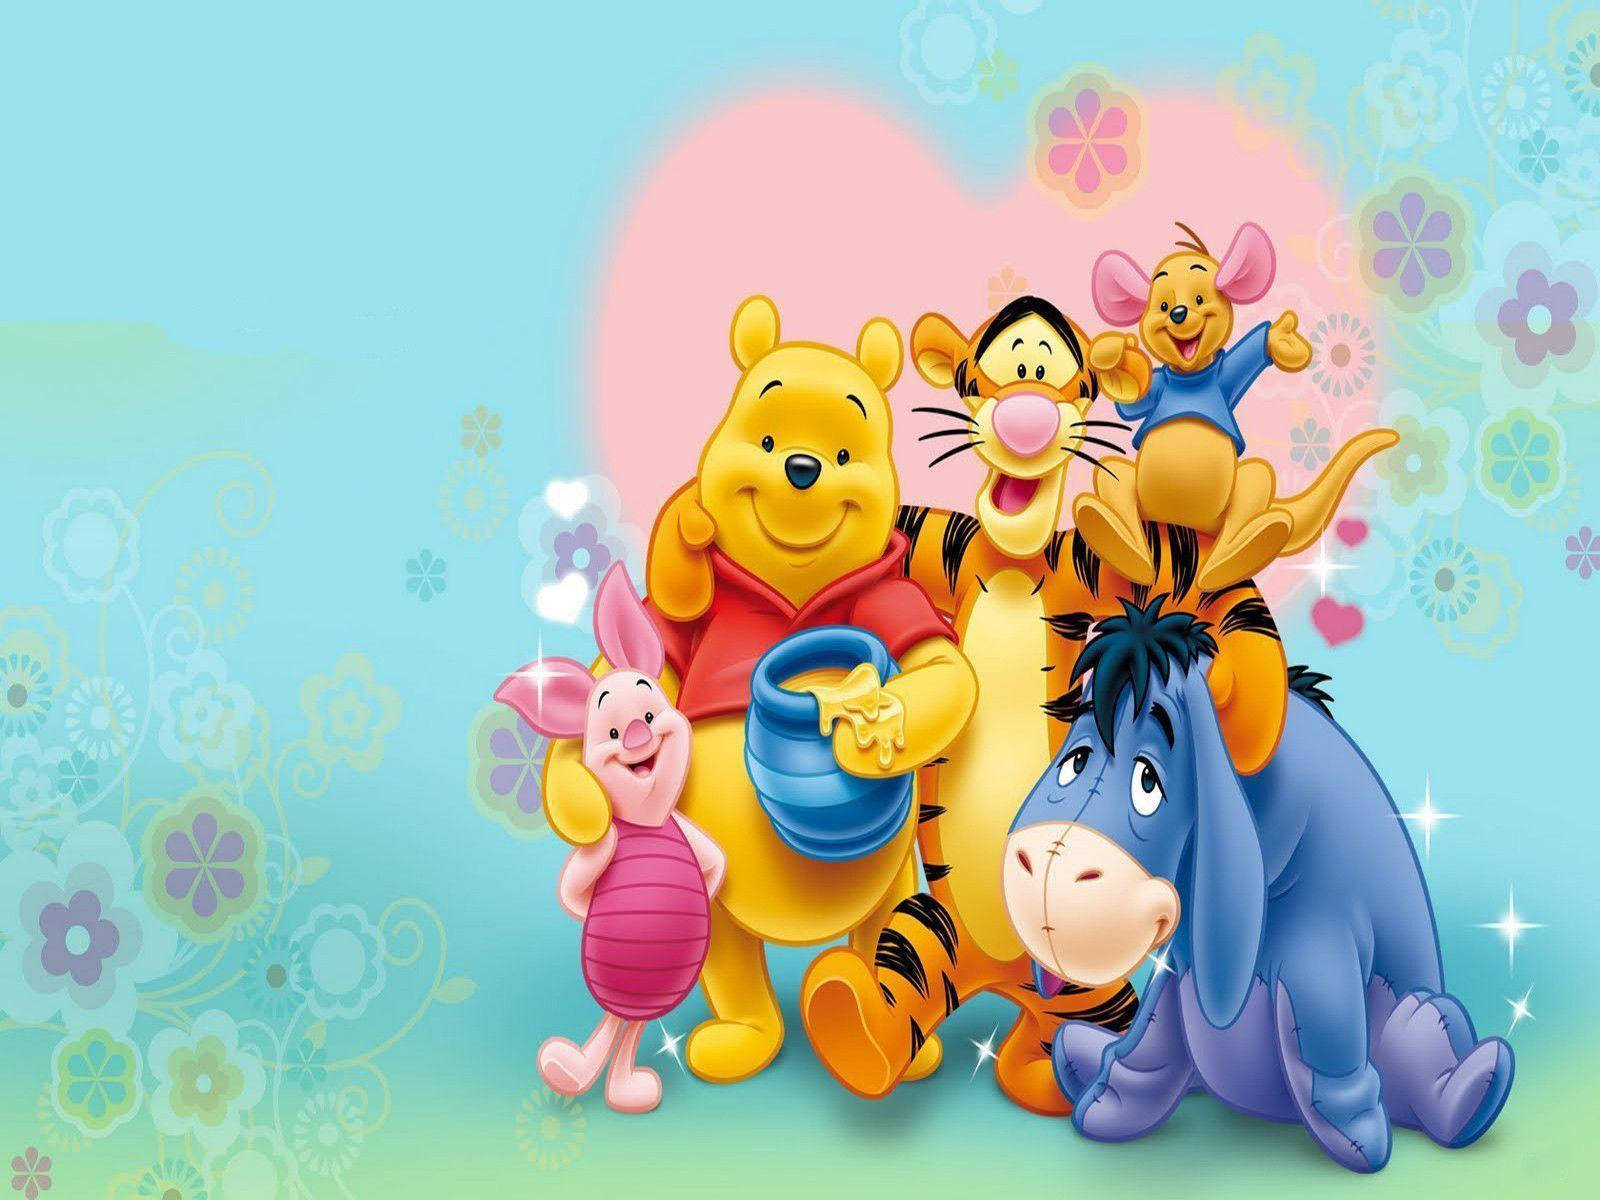 Top 999+ Winnie The Pooh Wallpaper Full HD, 4K✅Free to Use